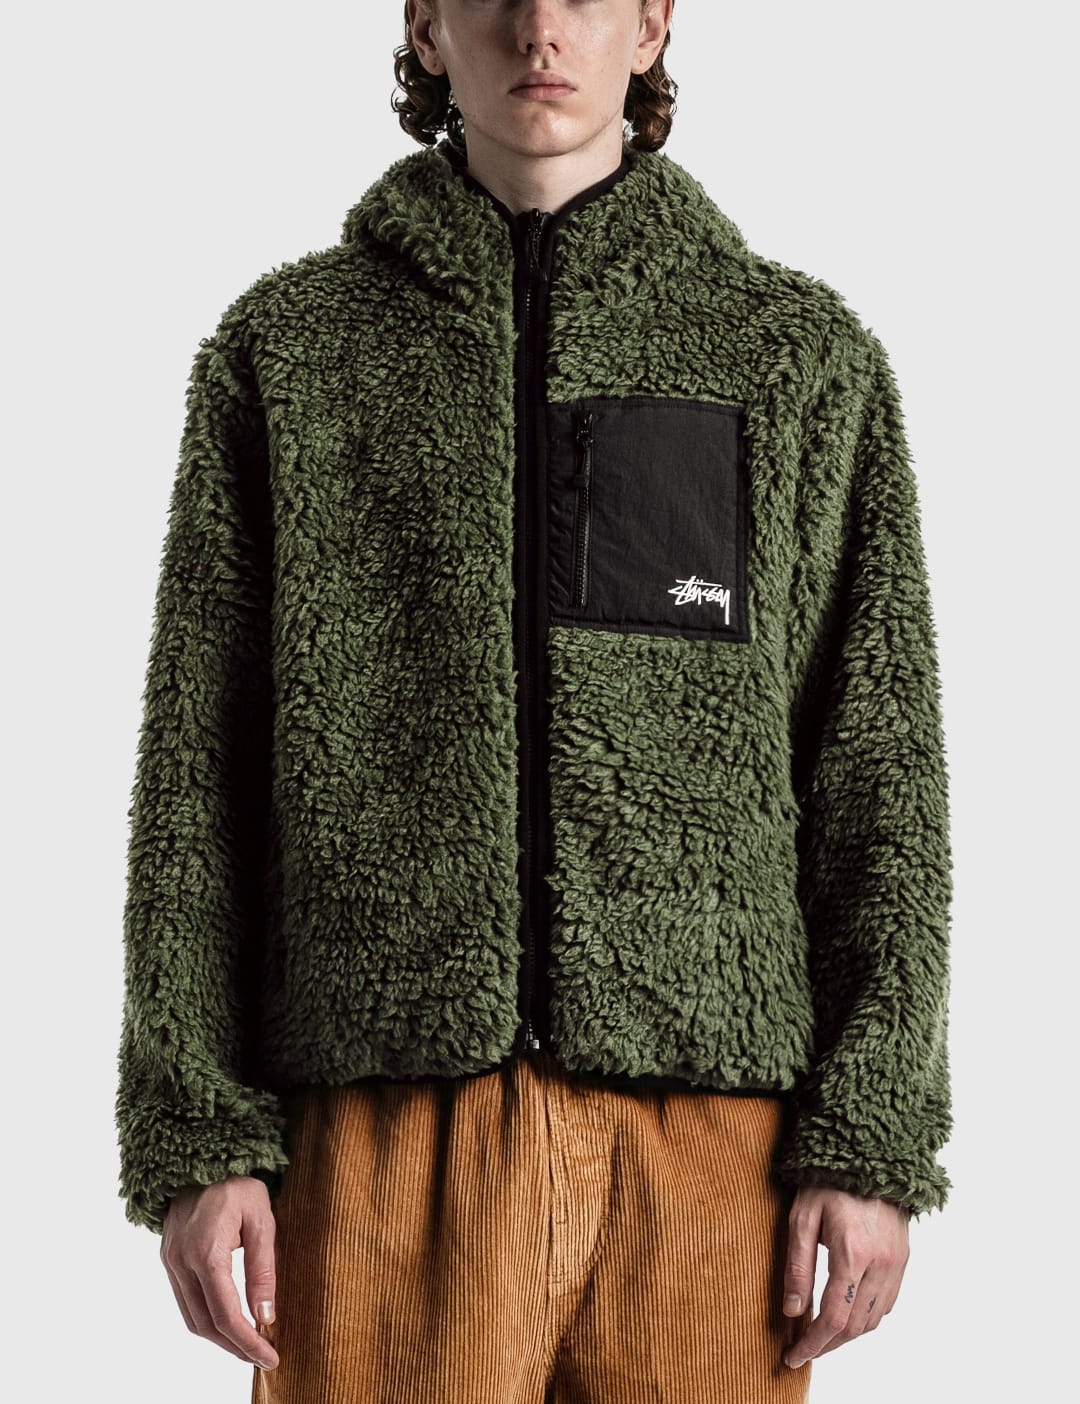 Stüssy - Sherpa Jacket | HBX - Globally Curated Fashion and 